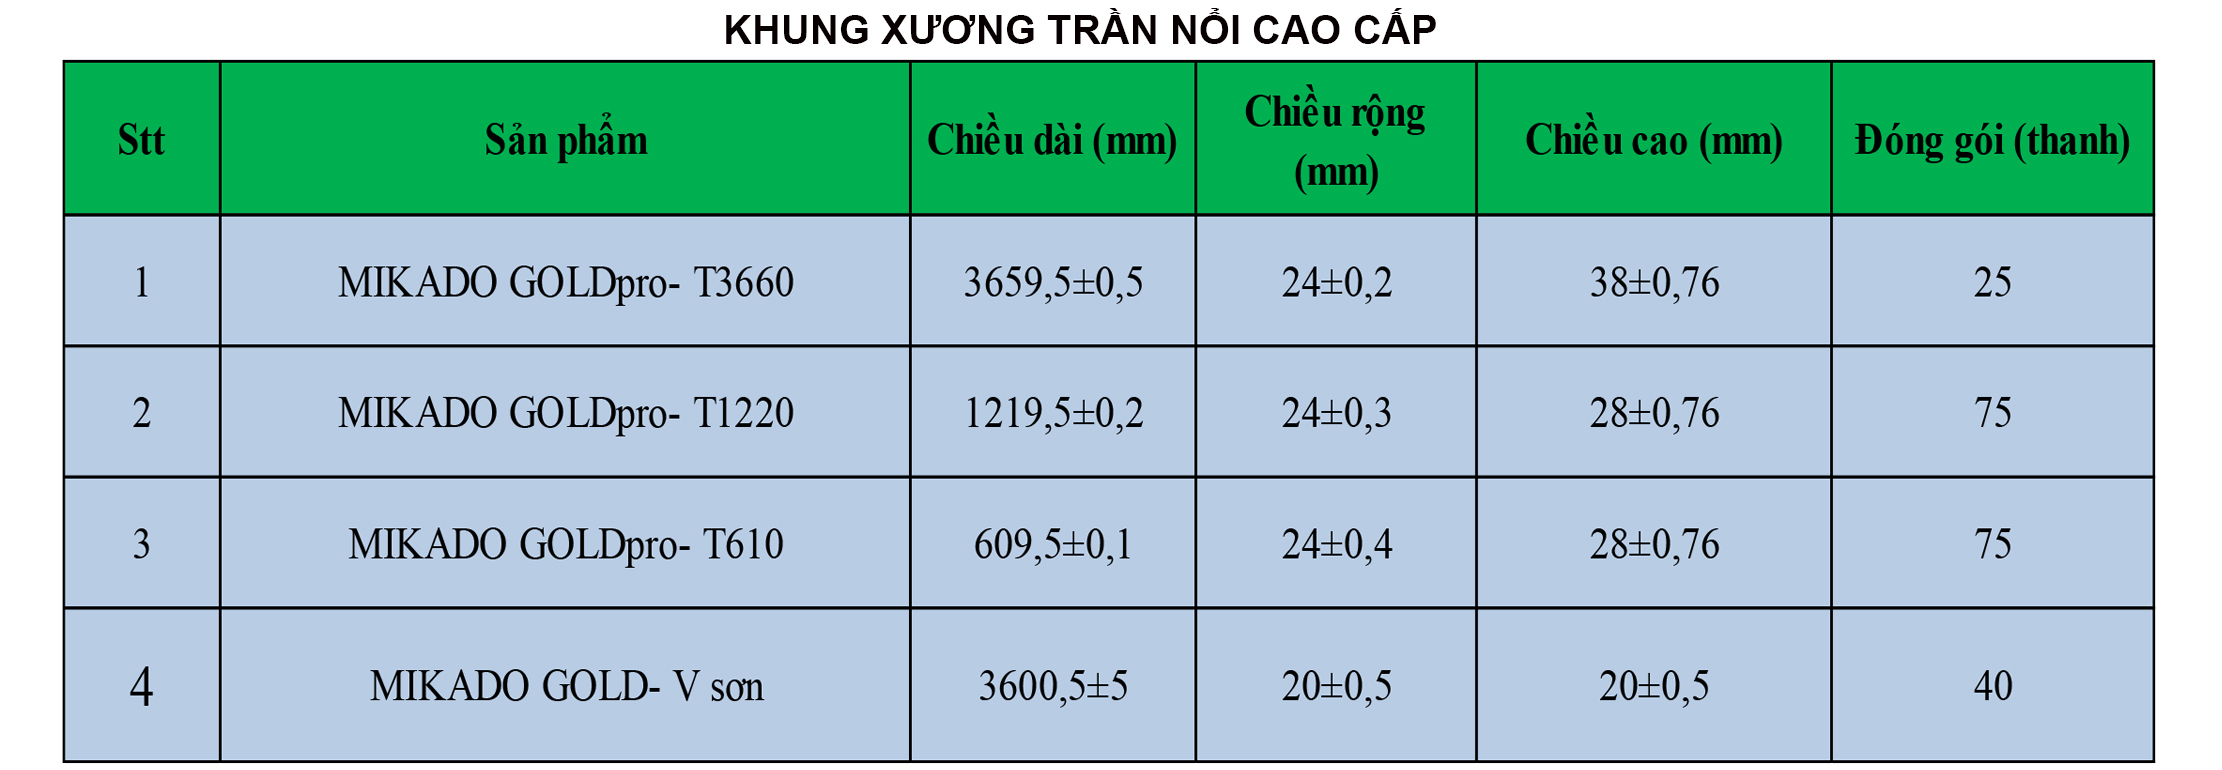 /Upload/product/quy-cach-dong-goi-tran-noi-cao-cap.jpg